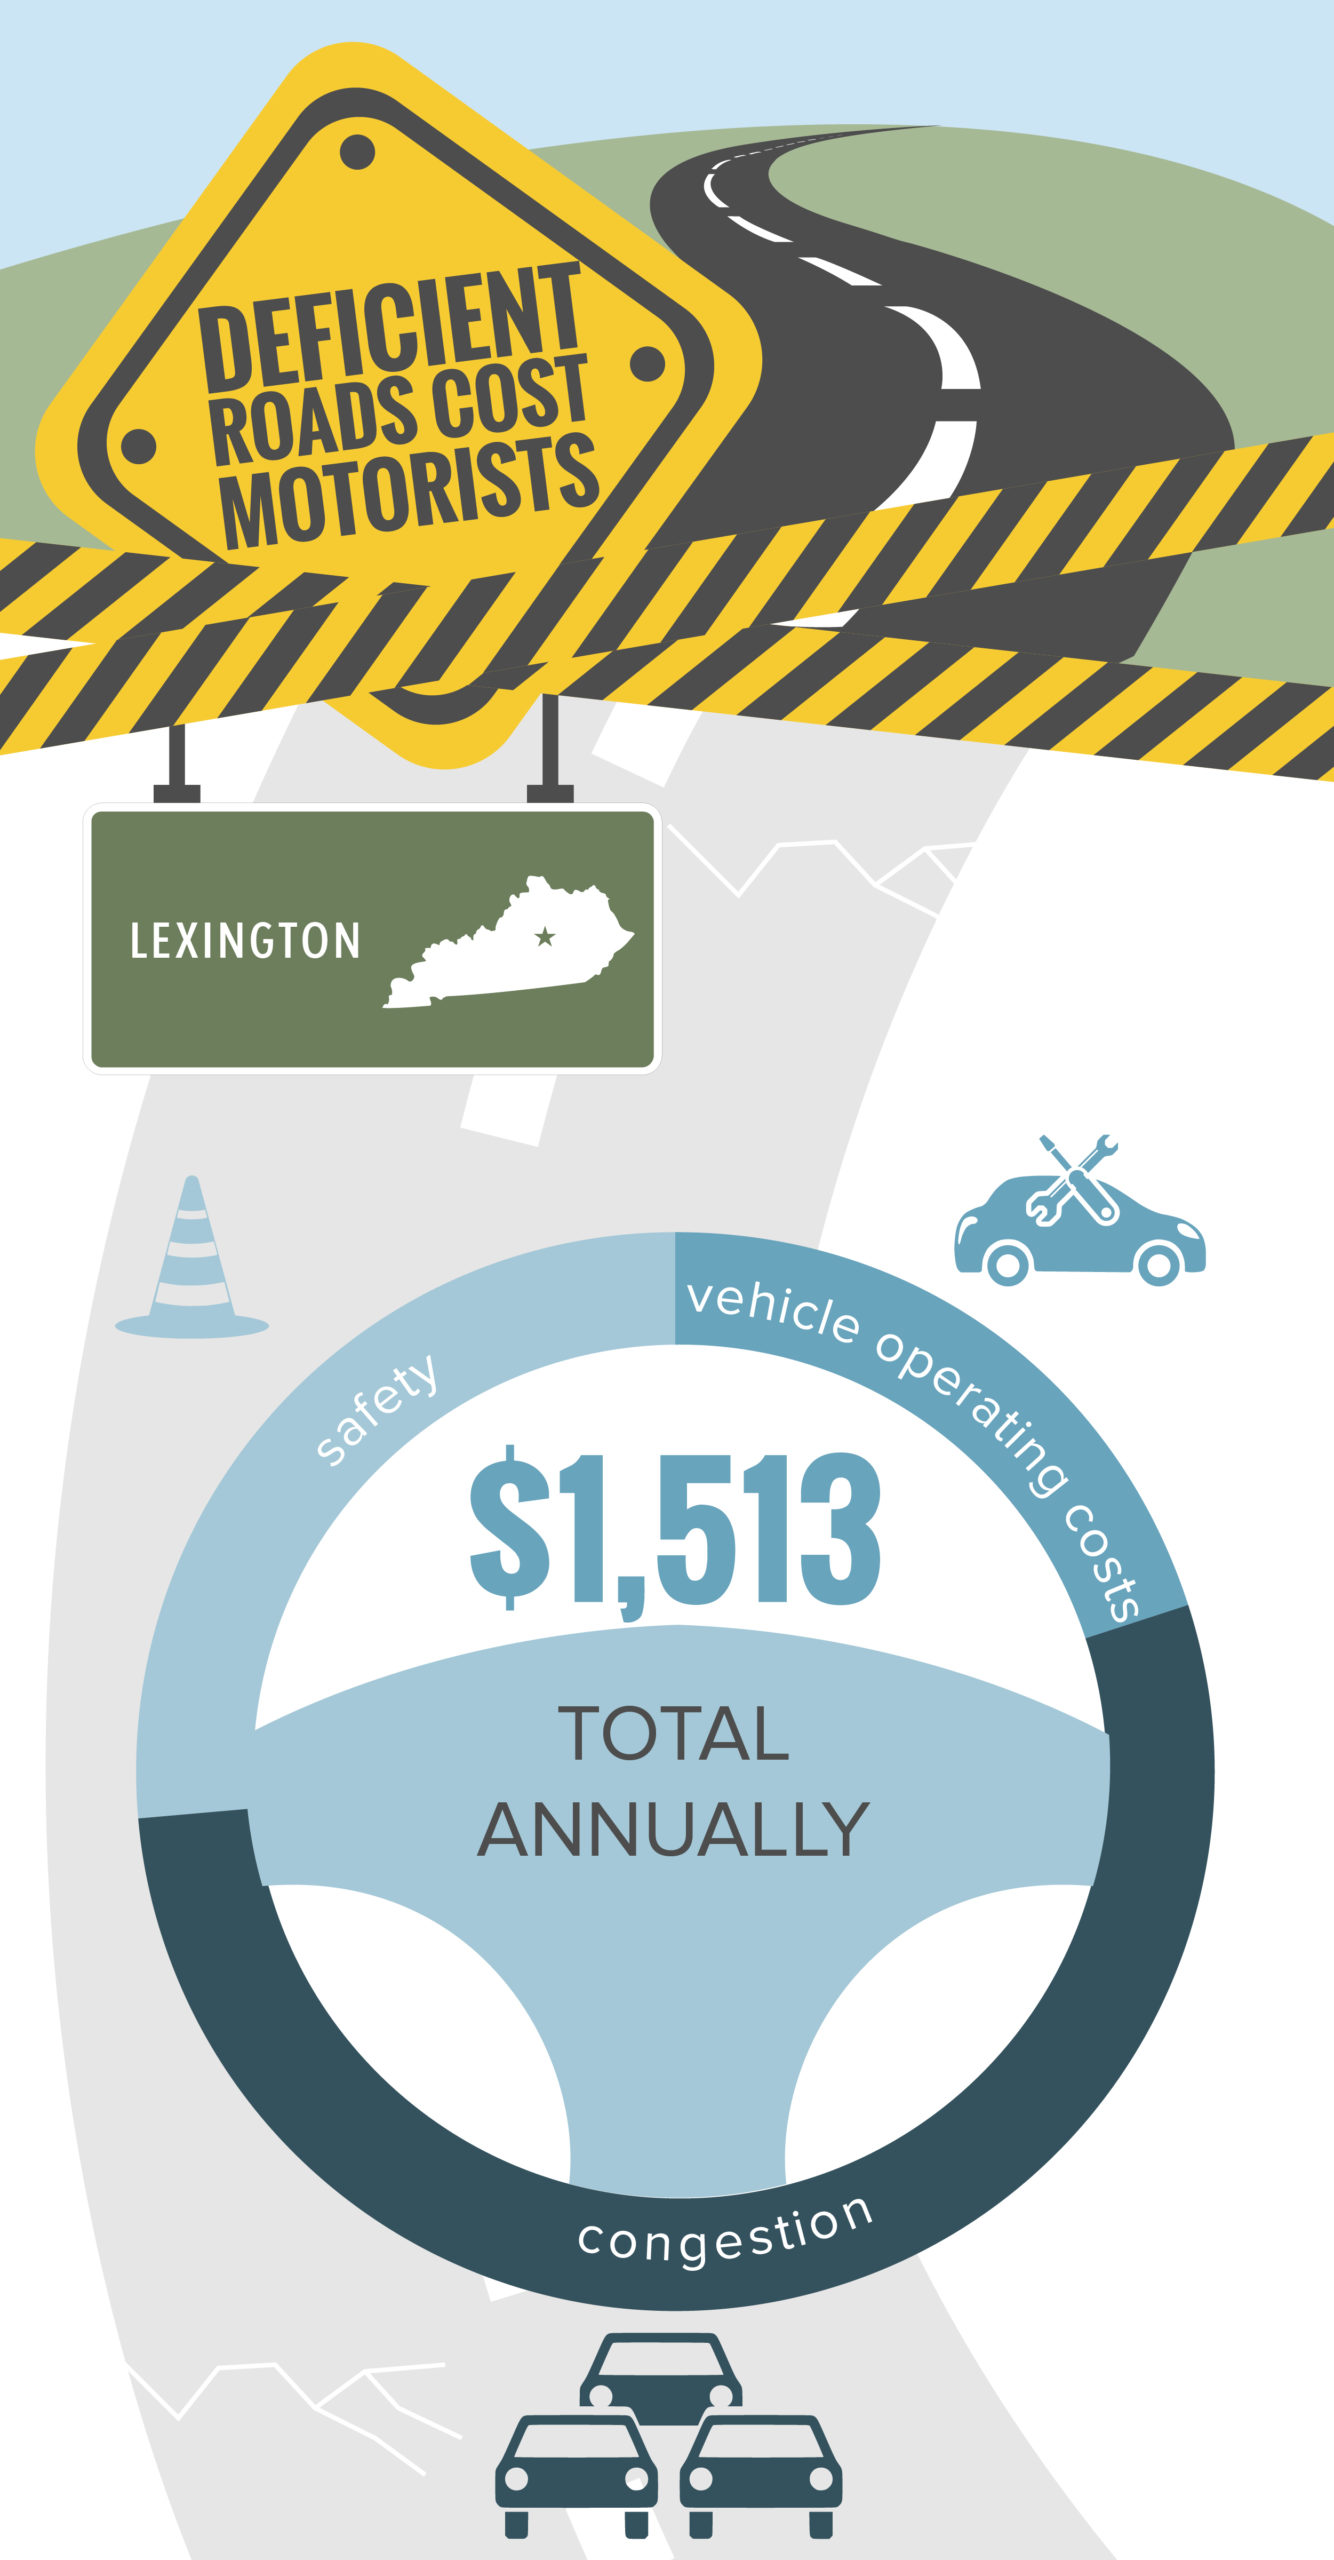 Lexington Deficient Roads Cost to Motorists Infographic – February 2022